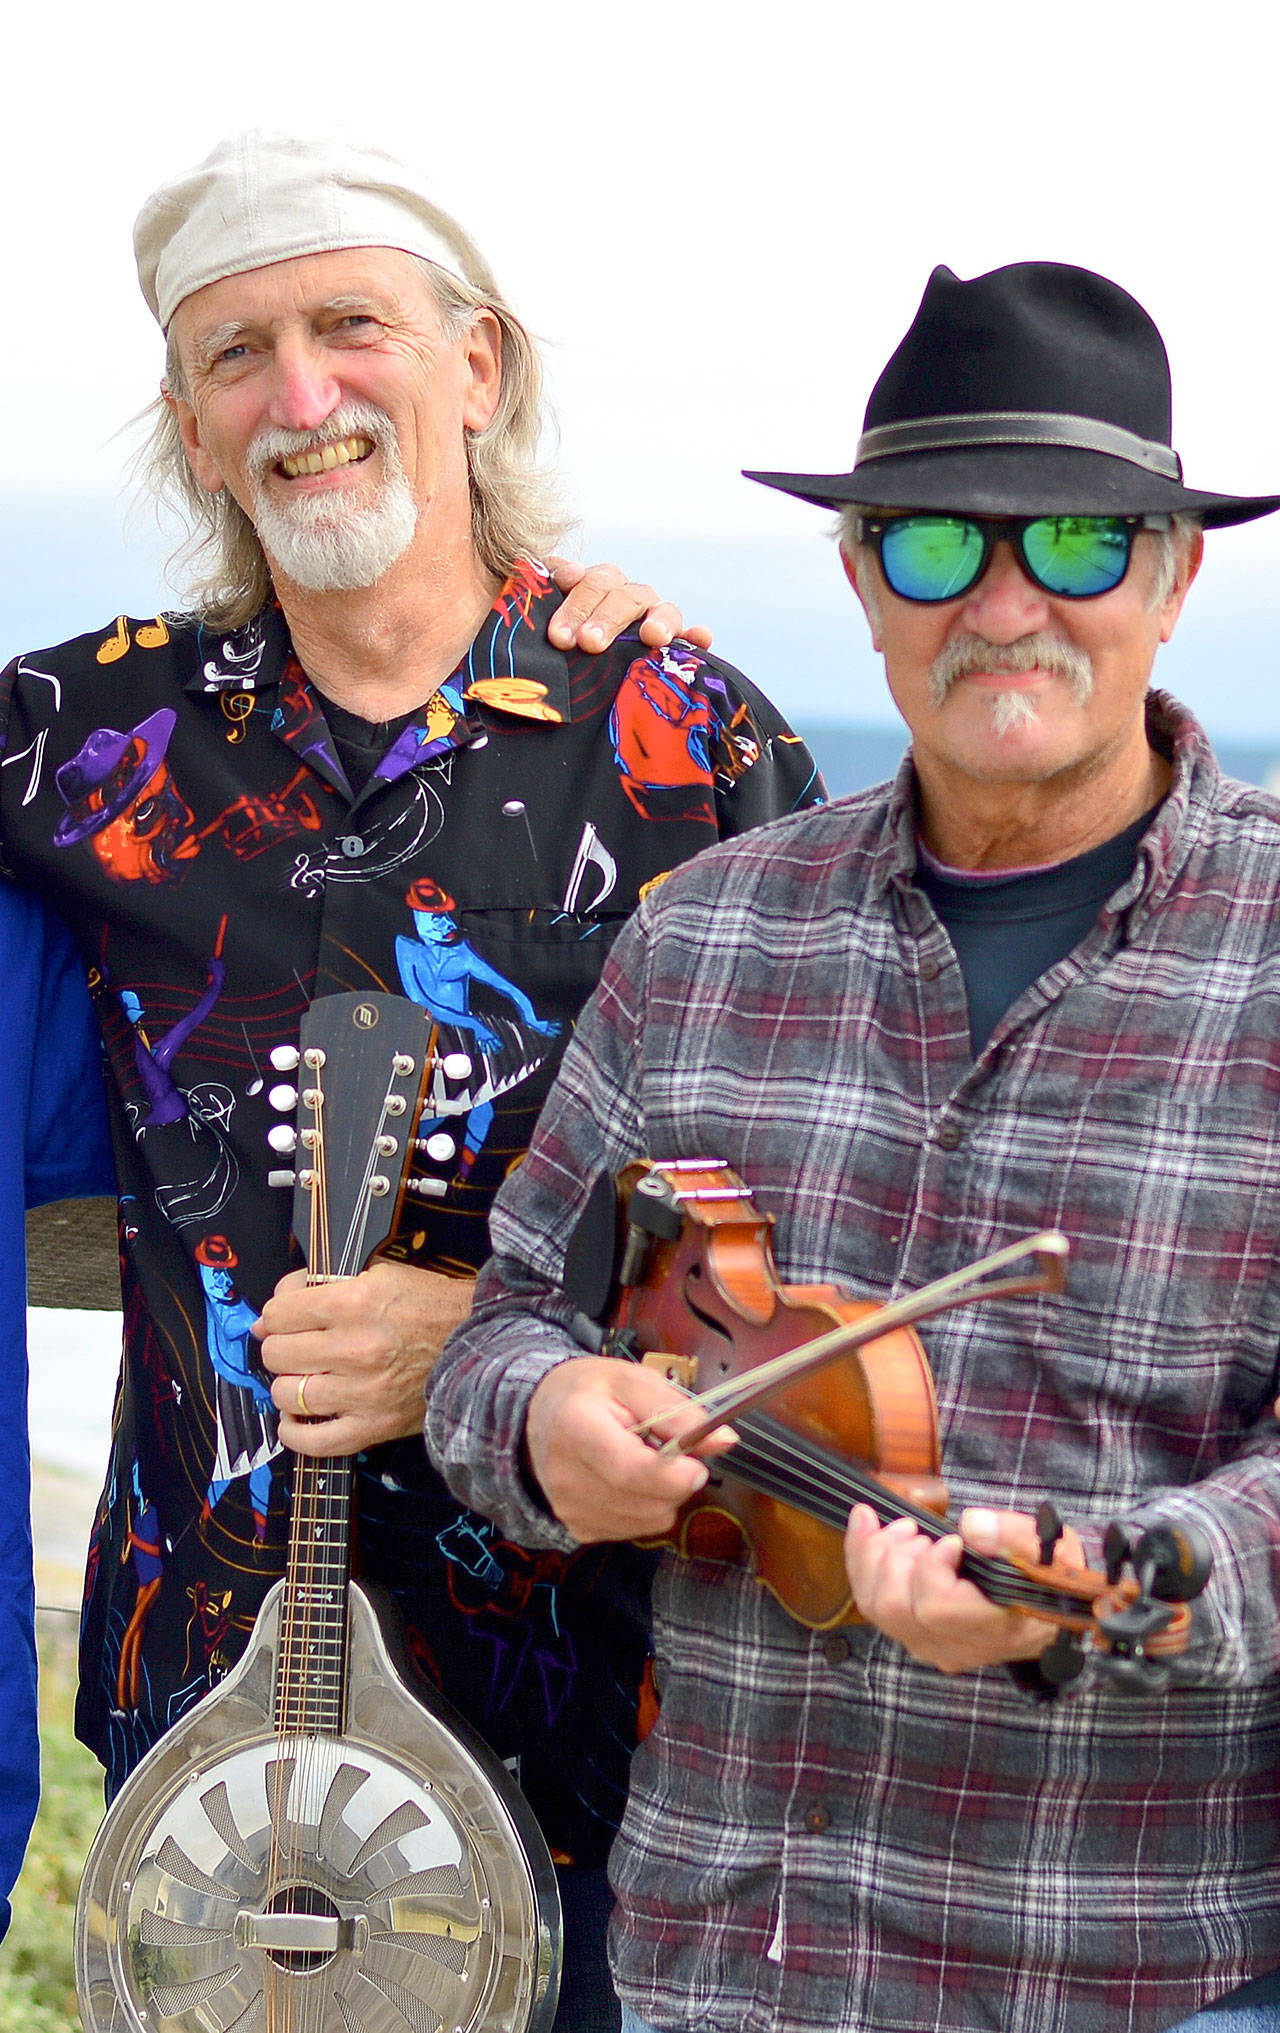 Multi-instrumentalist John Maxwell, left, and blues violinist Jon Parry will mix their music into the Red, White & the Blues event Sunday at the Old Alcohol Plant. (Diane Urbani de la Paz/Peninsula Daily News)